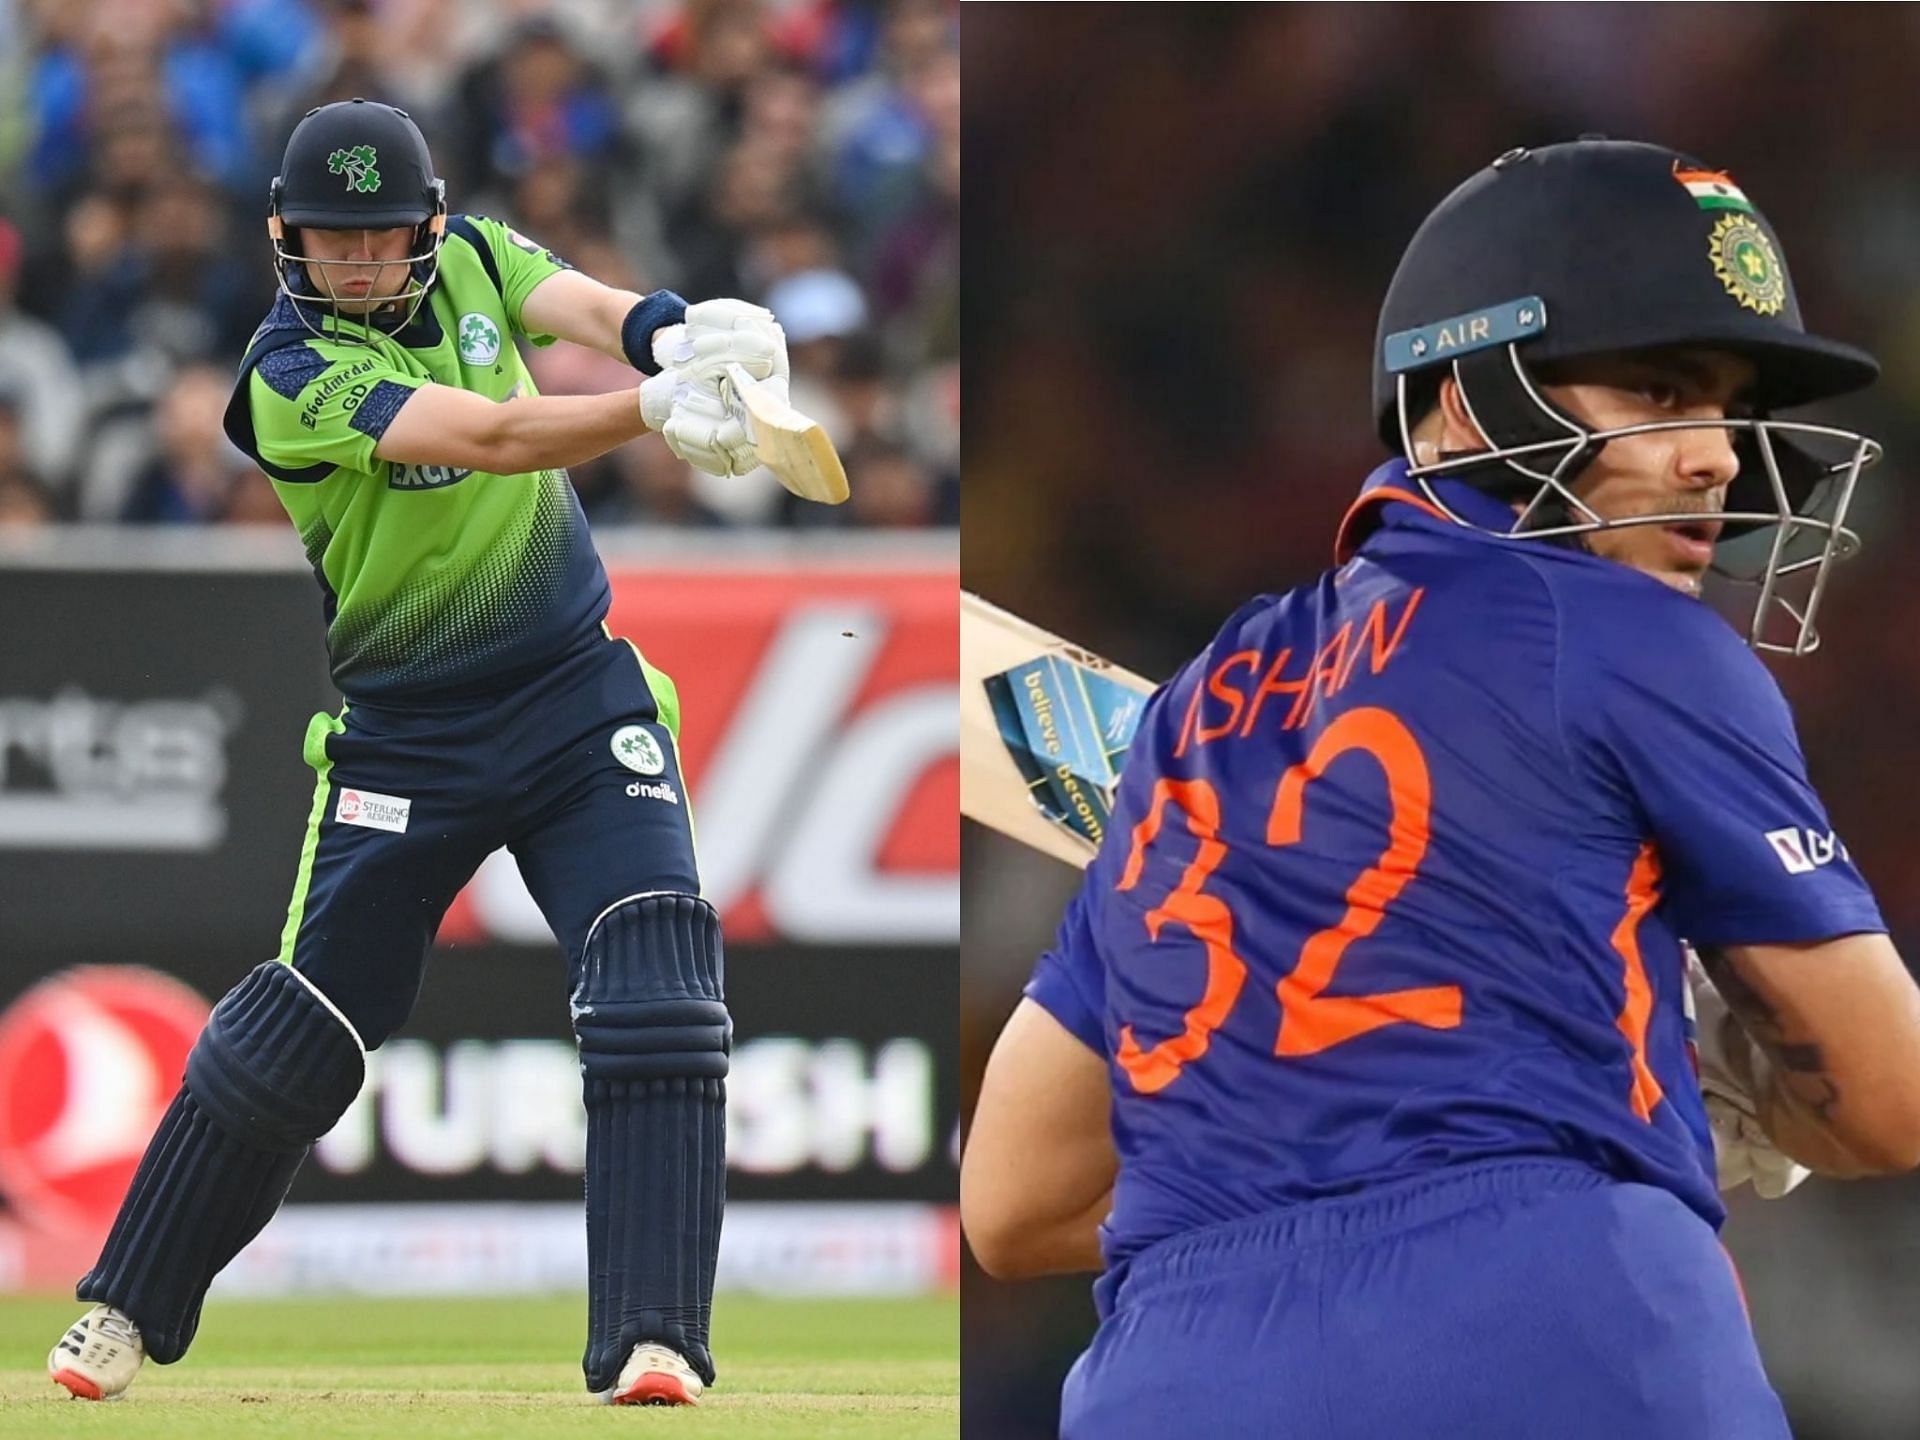 The second T20I between India and Ireland will be played on Tuesday